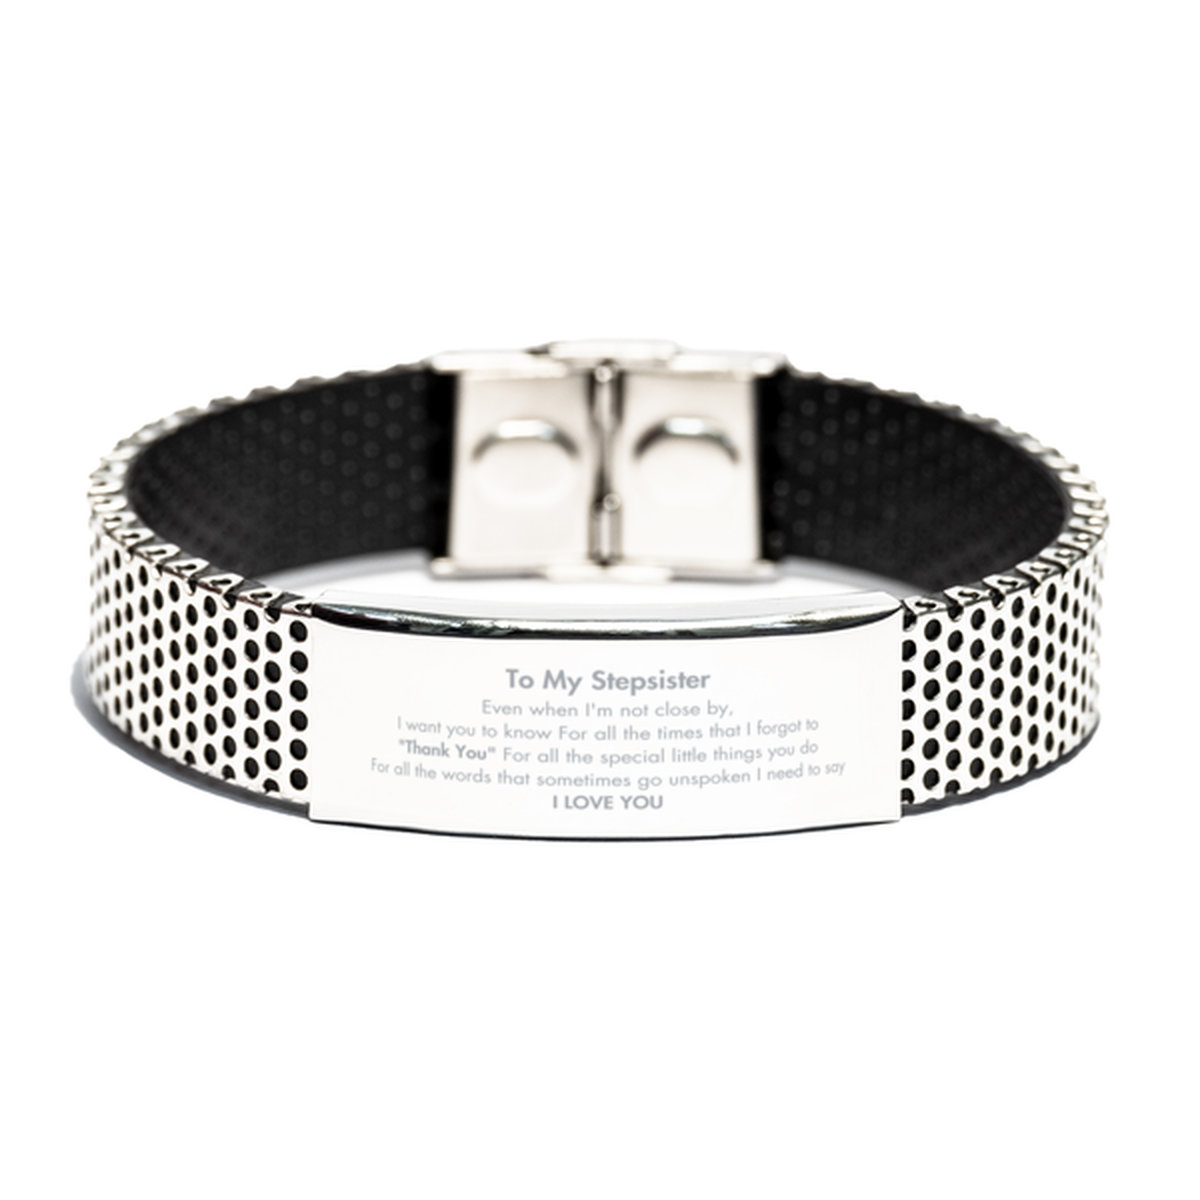 Thank You Gifts for Stepsister, Keepsake Stainless Steel Bracelet Gifts for Stepsister Birthday Mother's day Father's Day Stepsister For all the words That sometimes go unspoken I need to say I LOVE YOU